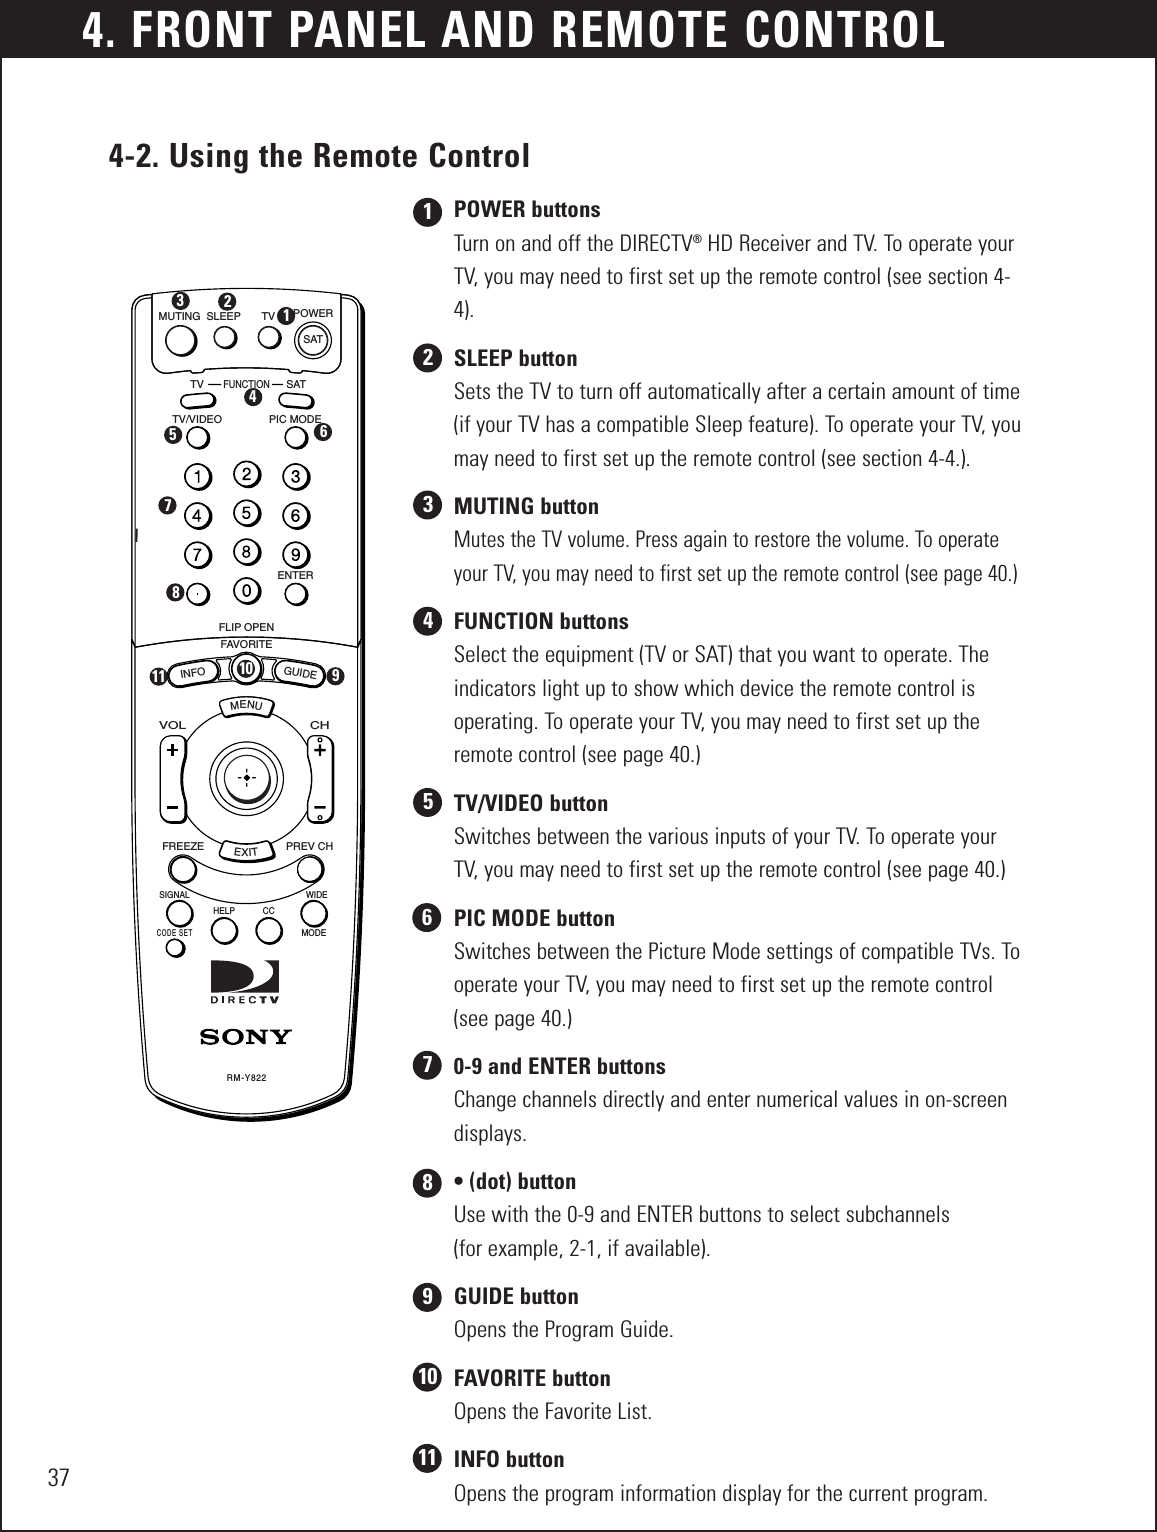 4. FRONT PANEL AND REMOTE CONTROL374-2. Using the Remote ControlPOWER buttonsTurn on and off the DIRECTV®HD Receiver and TV. To operate yourTV, you may need to first set up the remote control (see section 4-4).SLEEP buttonSets the TV to turn off automatically after a certain amount of time(if your TV has a compatible Sleep feature). To operate your TV, youmay need to first set up the remote control (see section 4-4.).MUTING buttonMutes the TV volume. Press again to restore the volume. To operateyour TV, you may need to first set up the remote control (see page 40.)FUNCTION buttonsSelect the equipment (TV or SAT) that you want to operate. Theindicators light up to show which device the remote control is operating. To operate your TV, you may need to first set up theremote control (see page 40.)TV/VIDEO buttonSwitches between the various inputs of your TV. To operate yourTV, you may need to first set up the remote control (see page 40.) PIC MODE buttonSwitches between the Picture Mode settings of compatible TVs. Tooperate your TV, you may need to first set up the remote control(see page 40.)0-9 and ENTER buttonsChange channels directly and enter numerical values in on-screendisplays.• (dot) buttonUse with the 0-9 and ENTER buttons to select subchannels (for example, 2-1, if available).GUIDE buttonOpens the Program Guide.FAVORITE buttonOpens the Favorite List.INFO buttonOpens the program information display for the current program.MENUMUTINGTVTV/VIDEOFAVORITEFLIP OPENFREEZECODE SETSIGNAL WIDEMODEHELP CCPREV CHCHVOLGUIDEINFOENTERPIC MODEFUNCTIONSATSLEEP TV POWERSATEXITRM-Y82212345123456786789101110 911